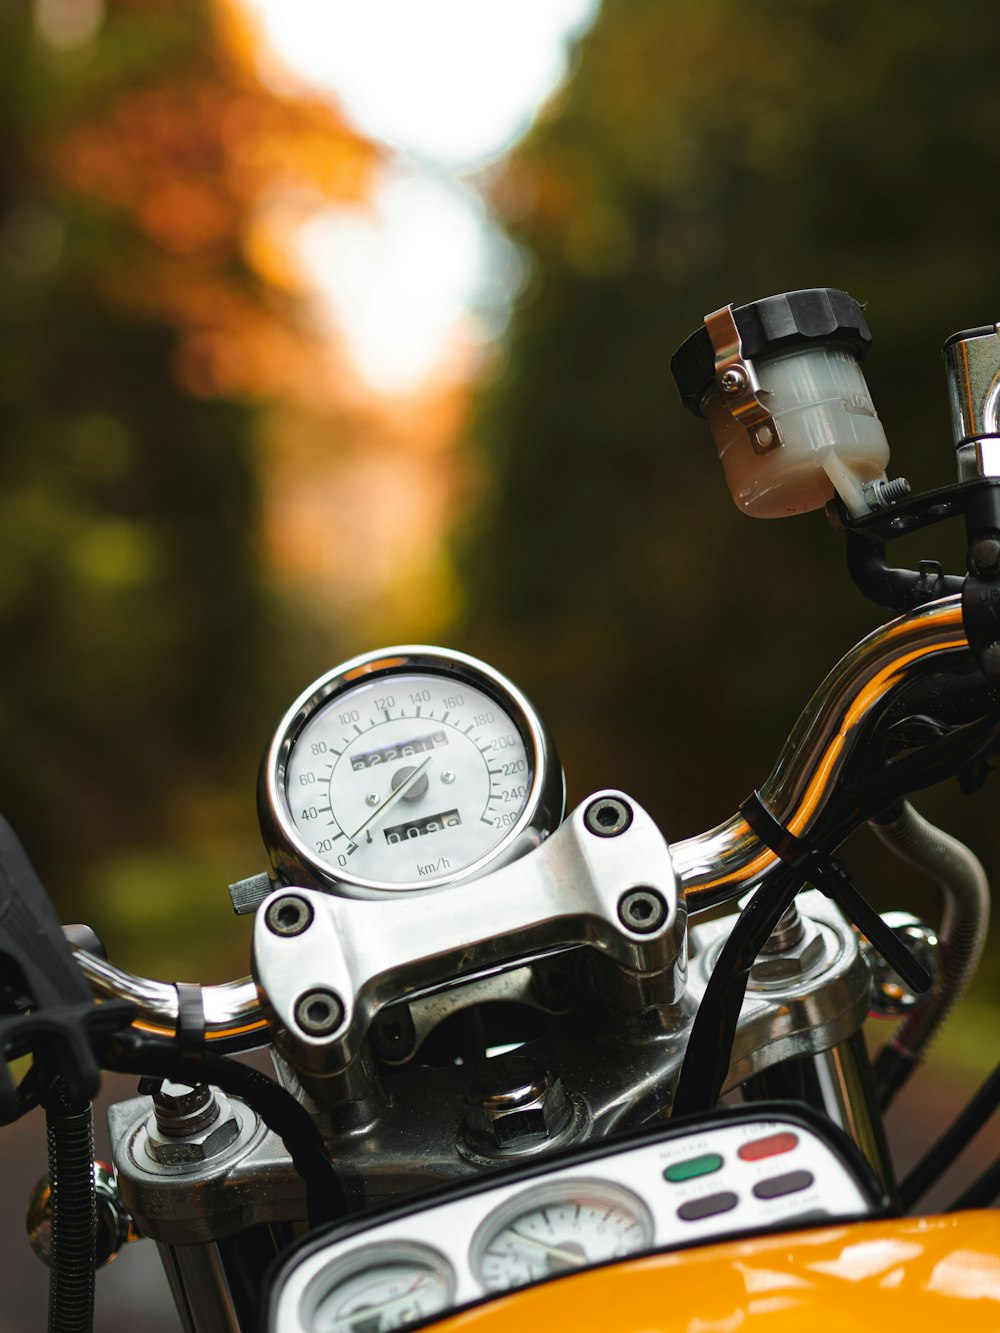 close view of motorcycle instrument panel cluster